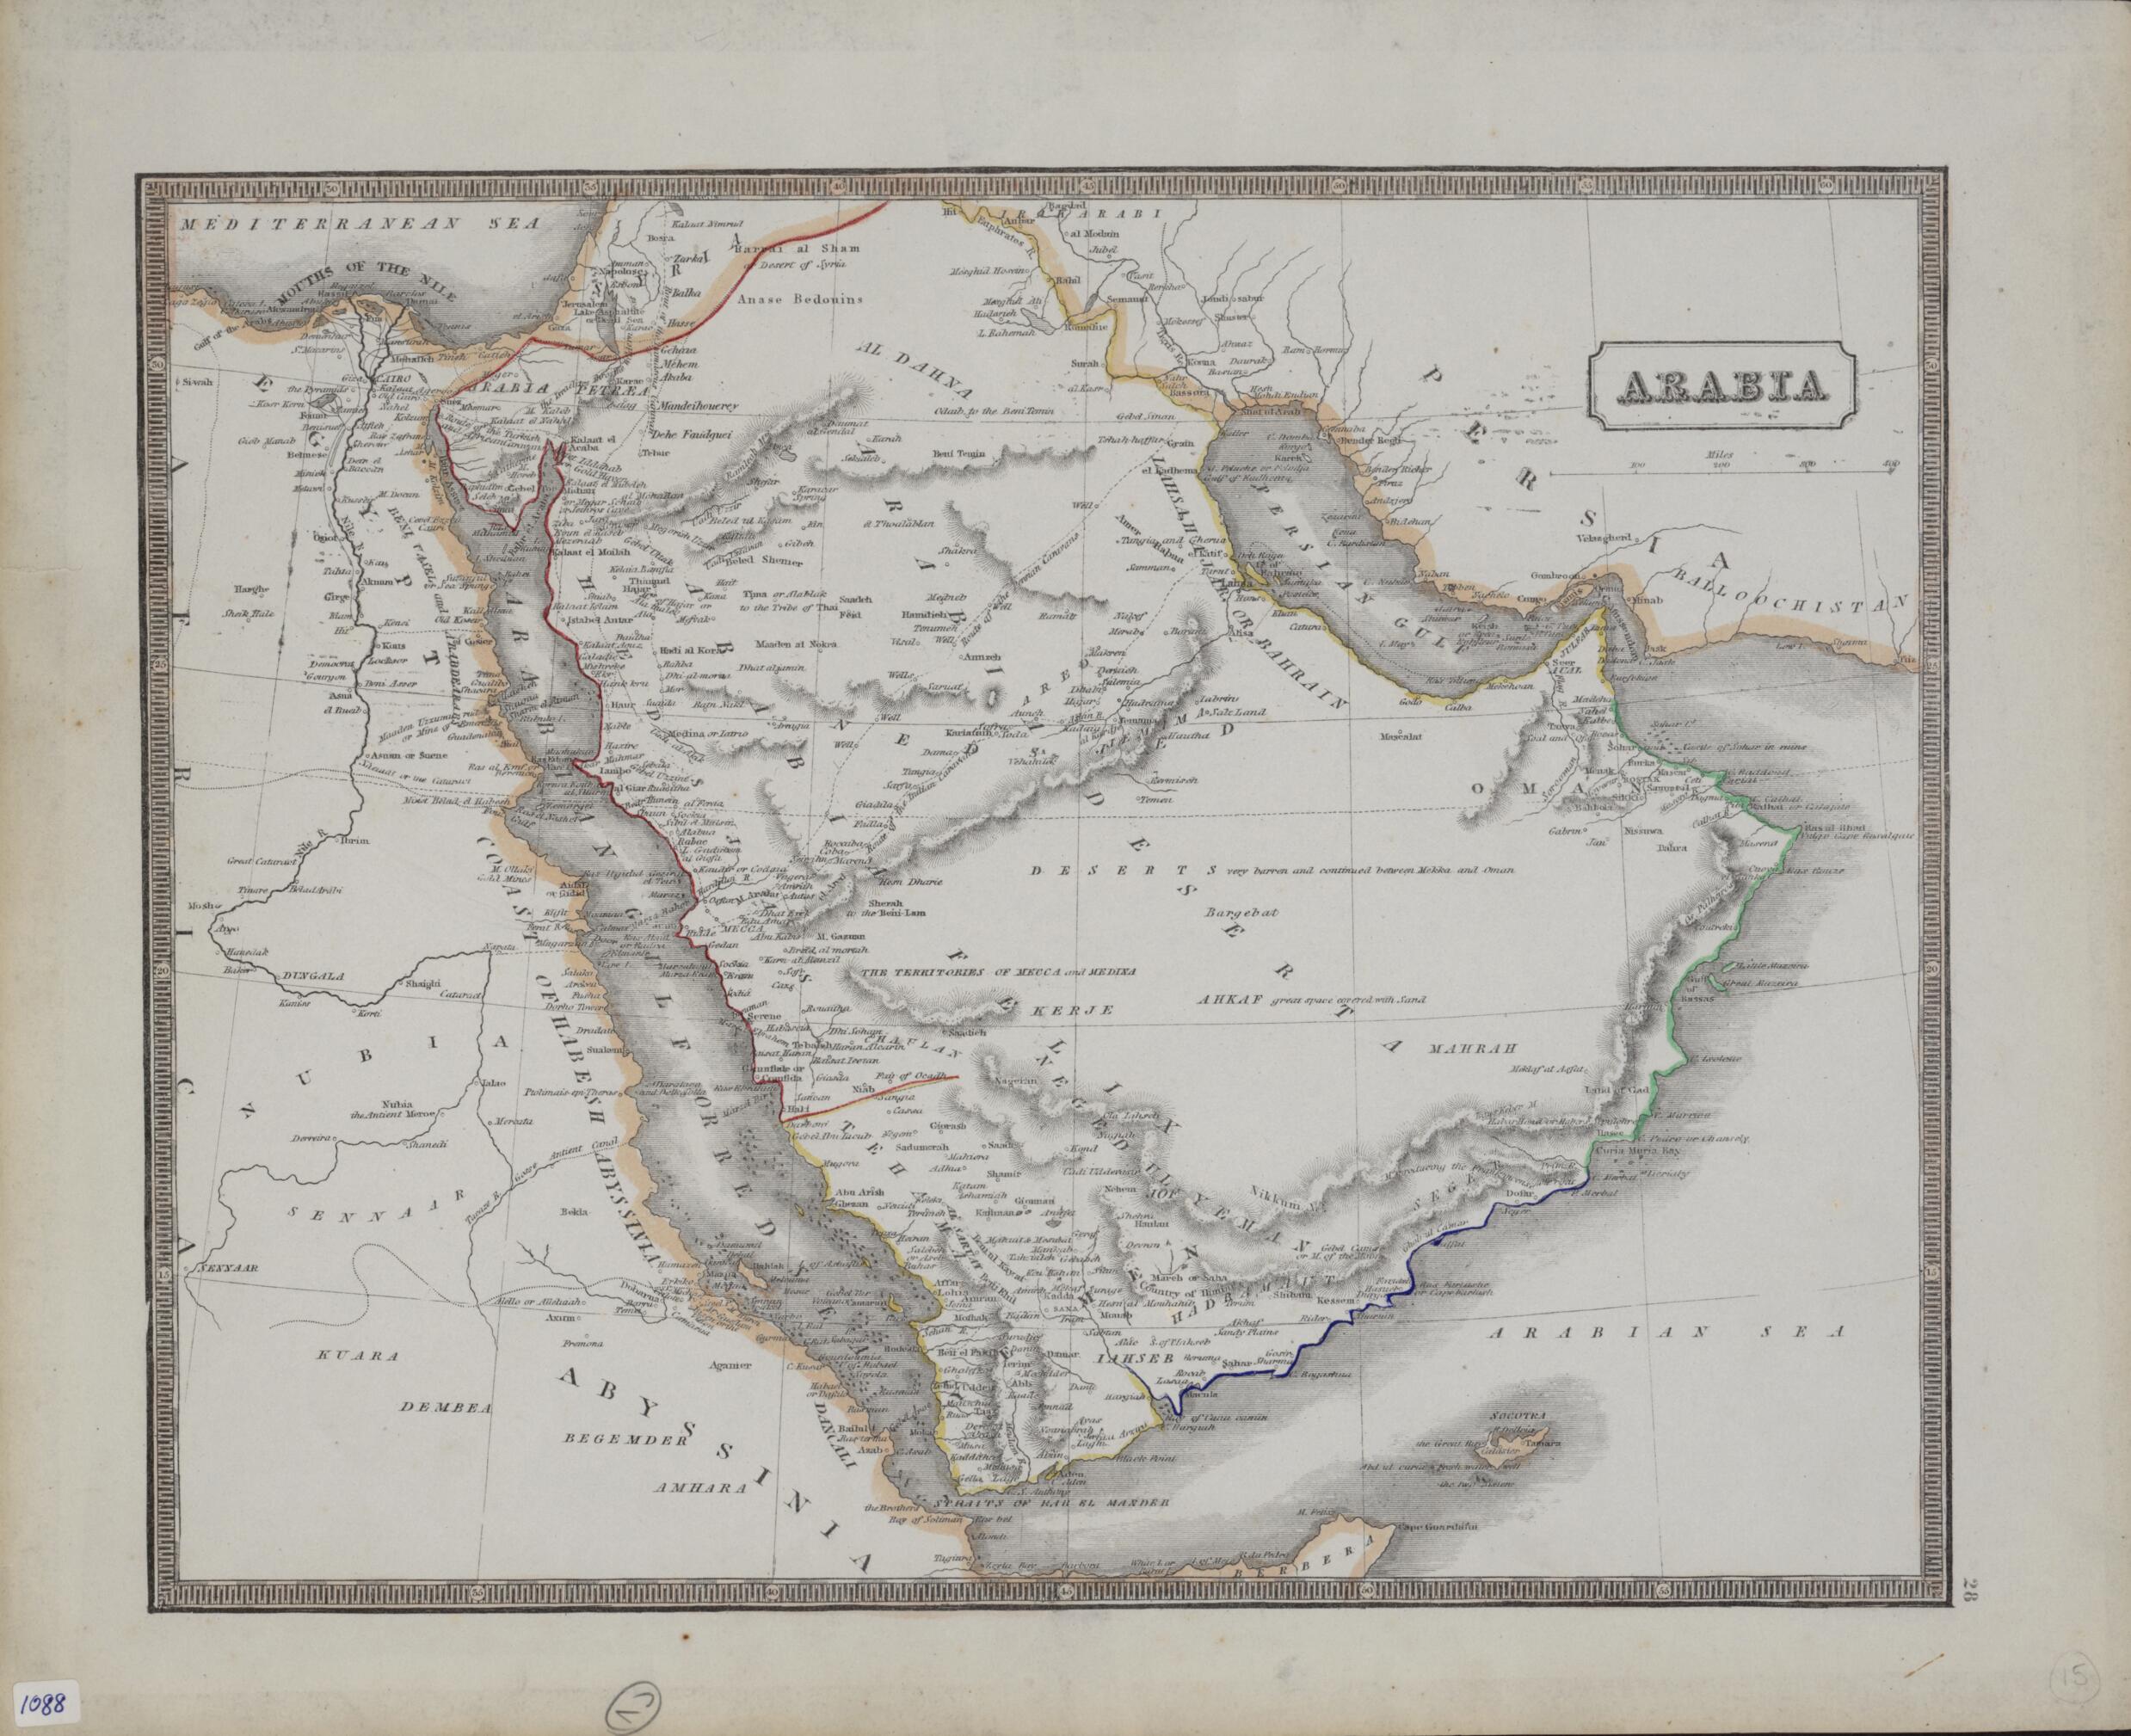 This old map of Arabia from 1860 was created by  in 1860